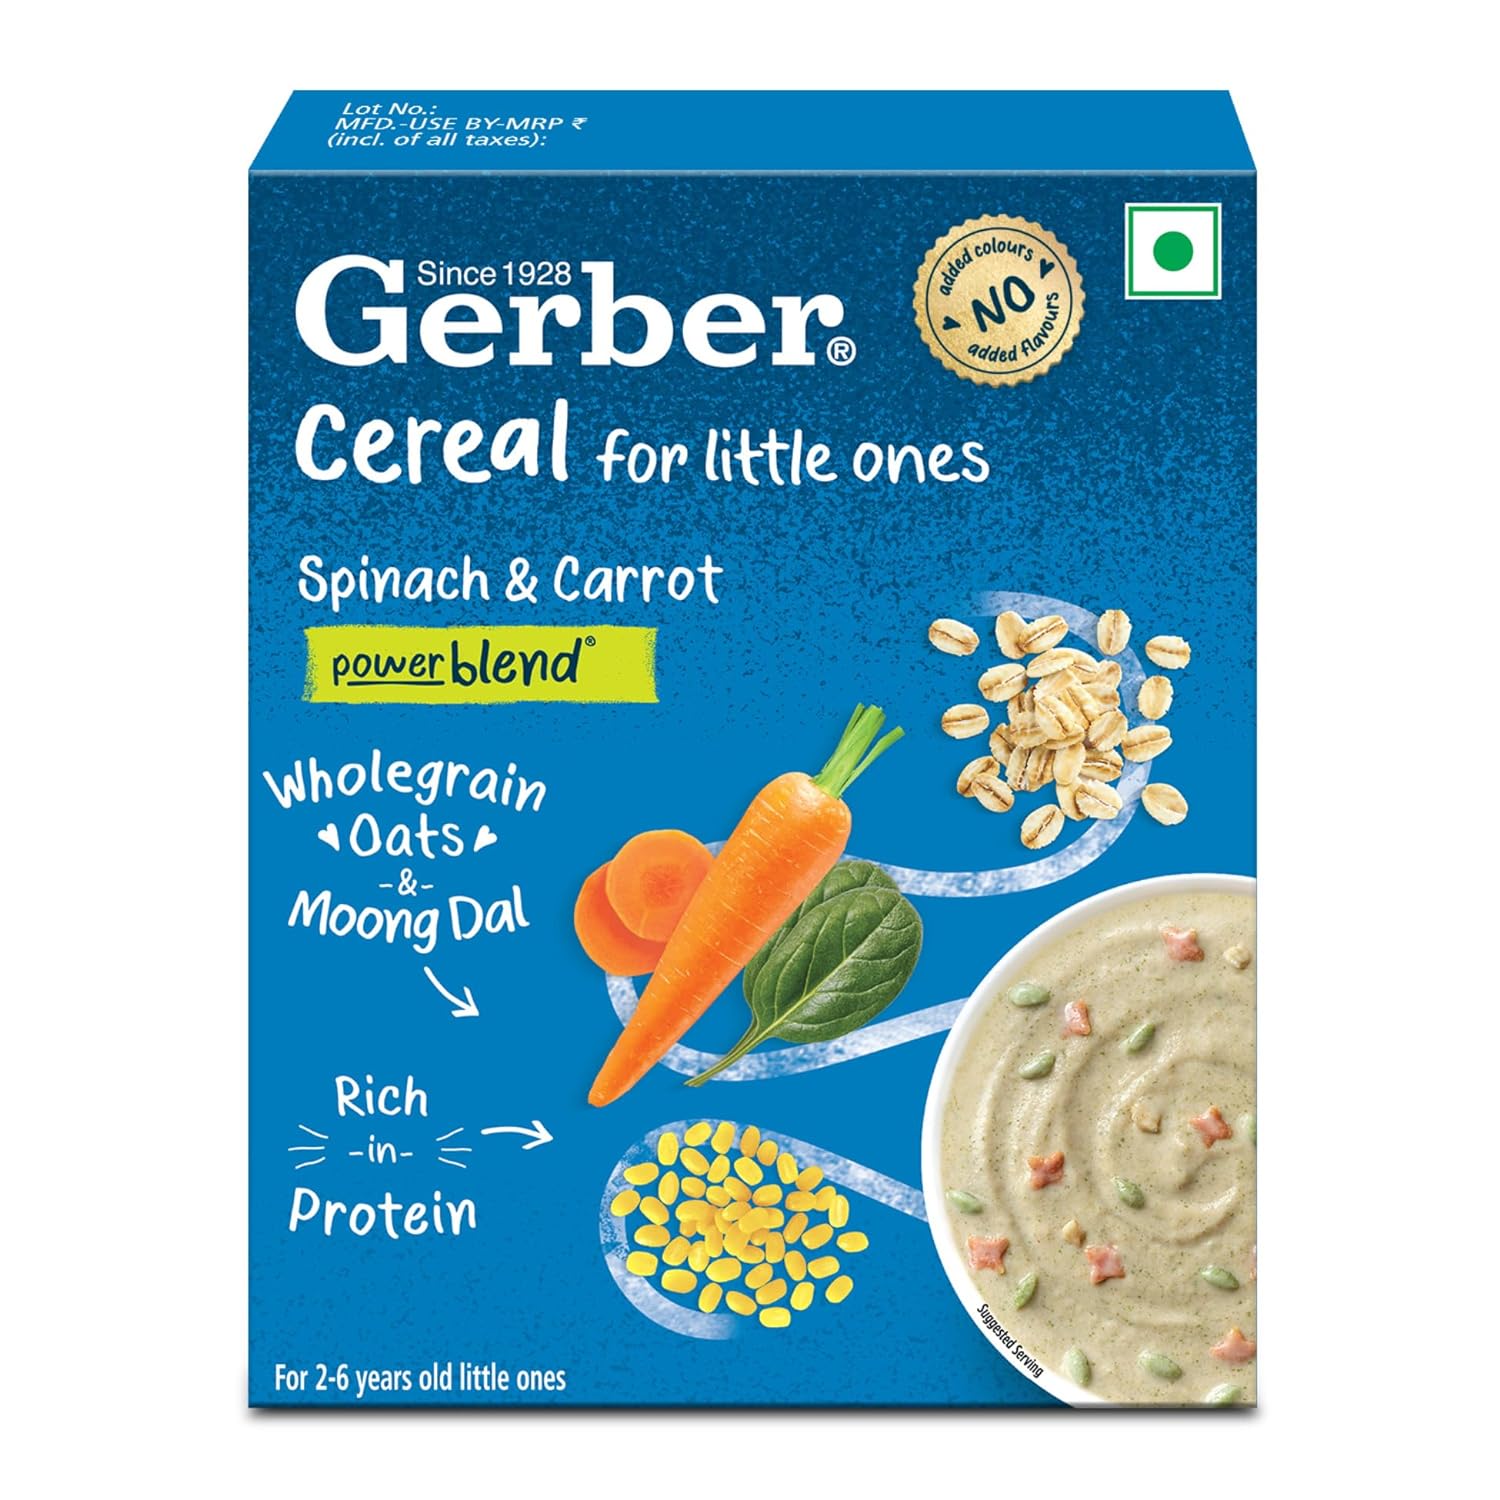 Nestle GERBER Cereals - Spinach & Carrot, 300g